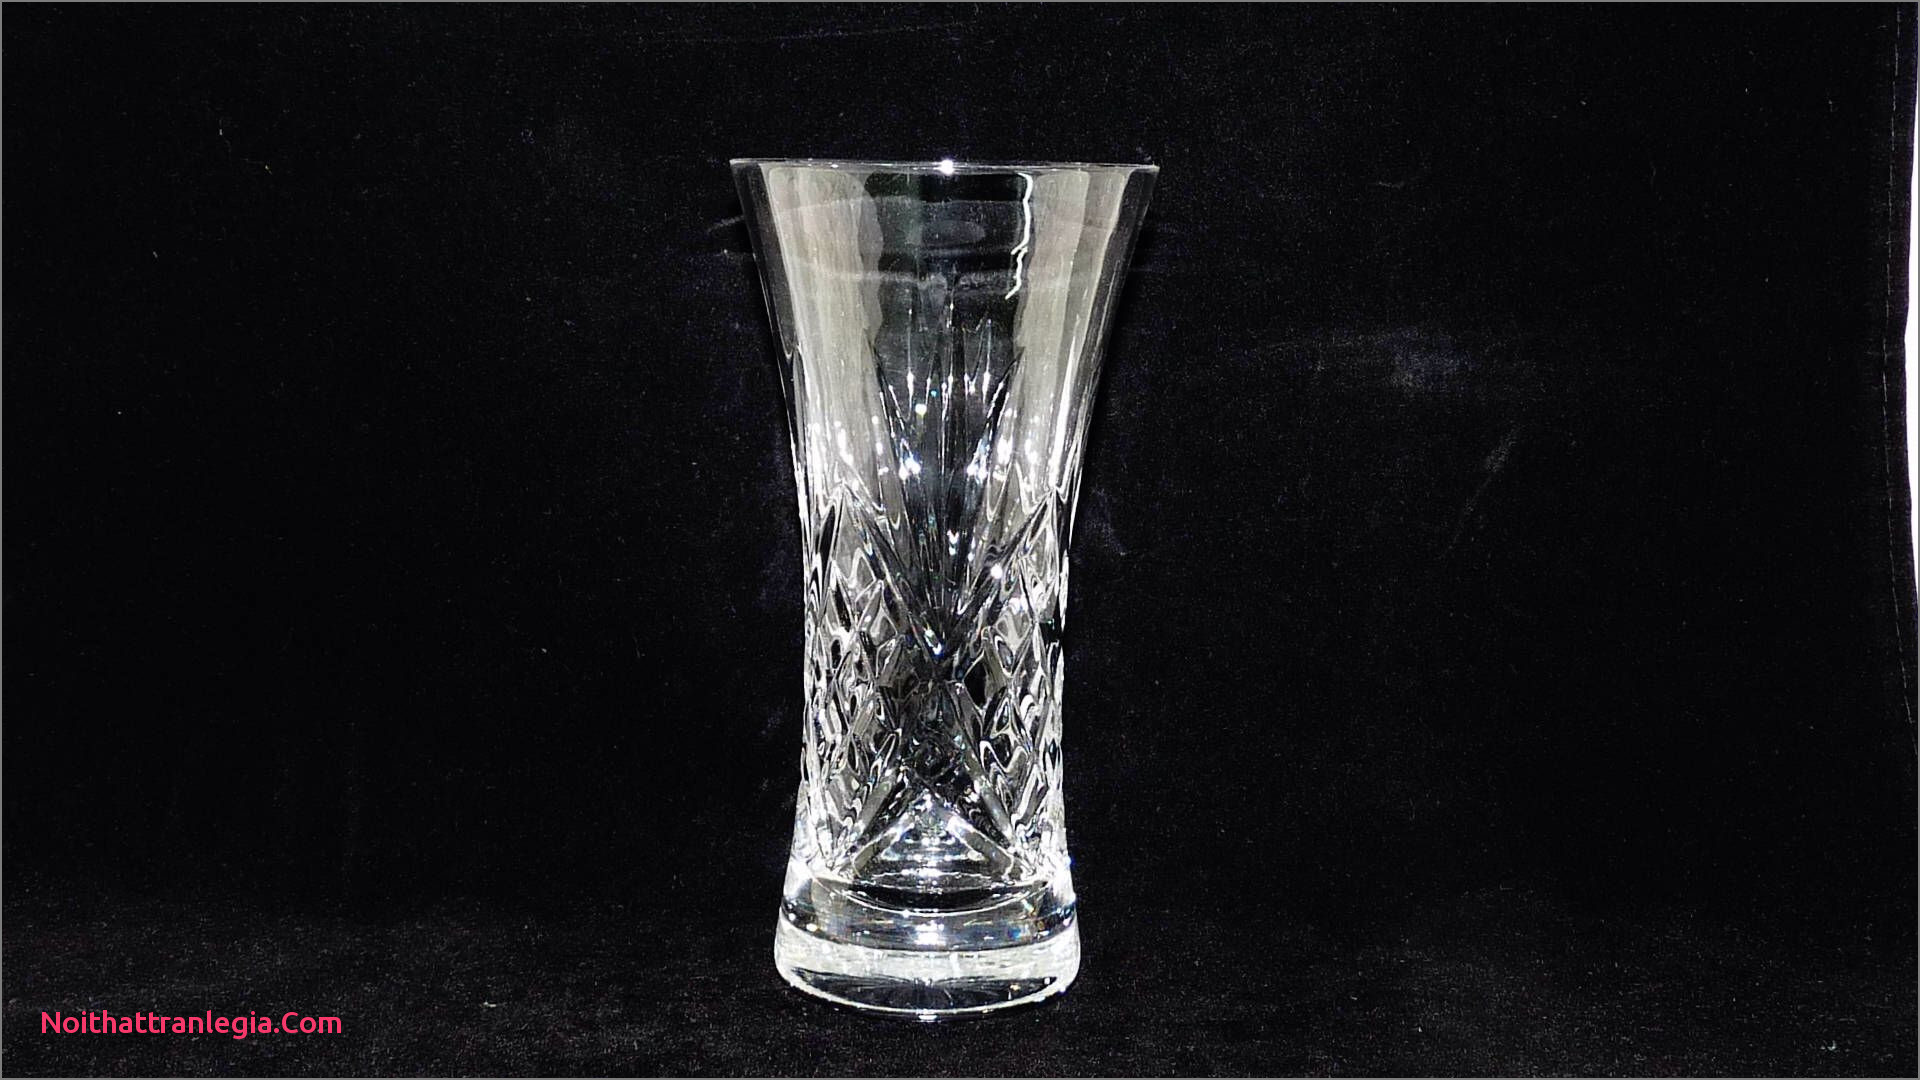 30 Elegant Fenton Glass Small Vase 2024 free download fenton glass small vase of 20 cut glass antique vase noithattranlegia vases design with regard to excited to share the latest addition to my etsy shop small glass vase